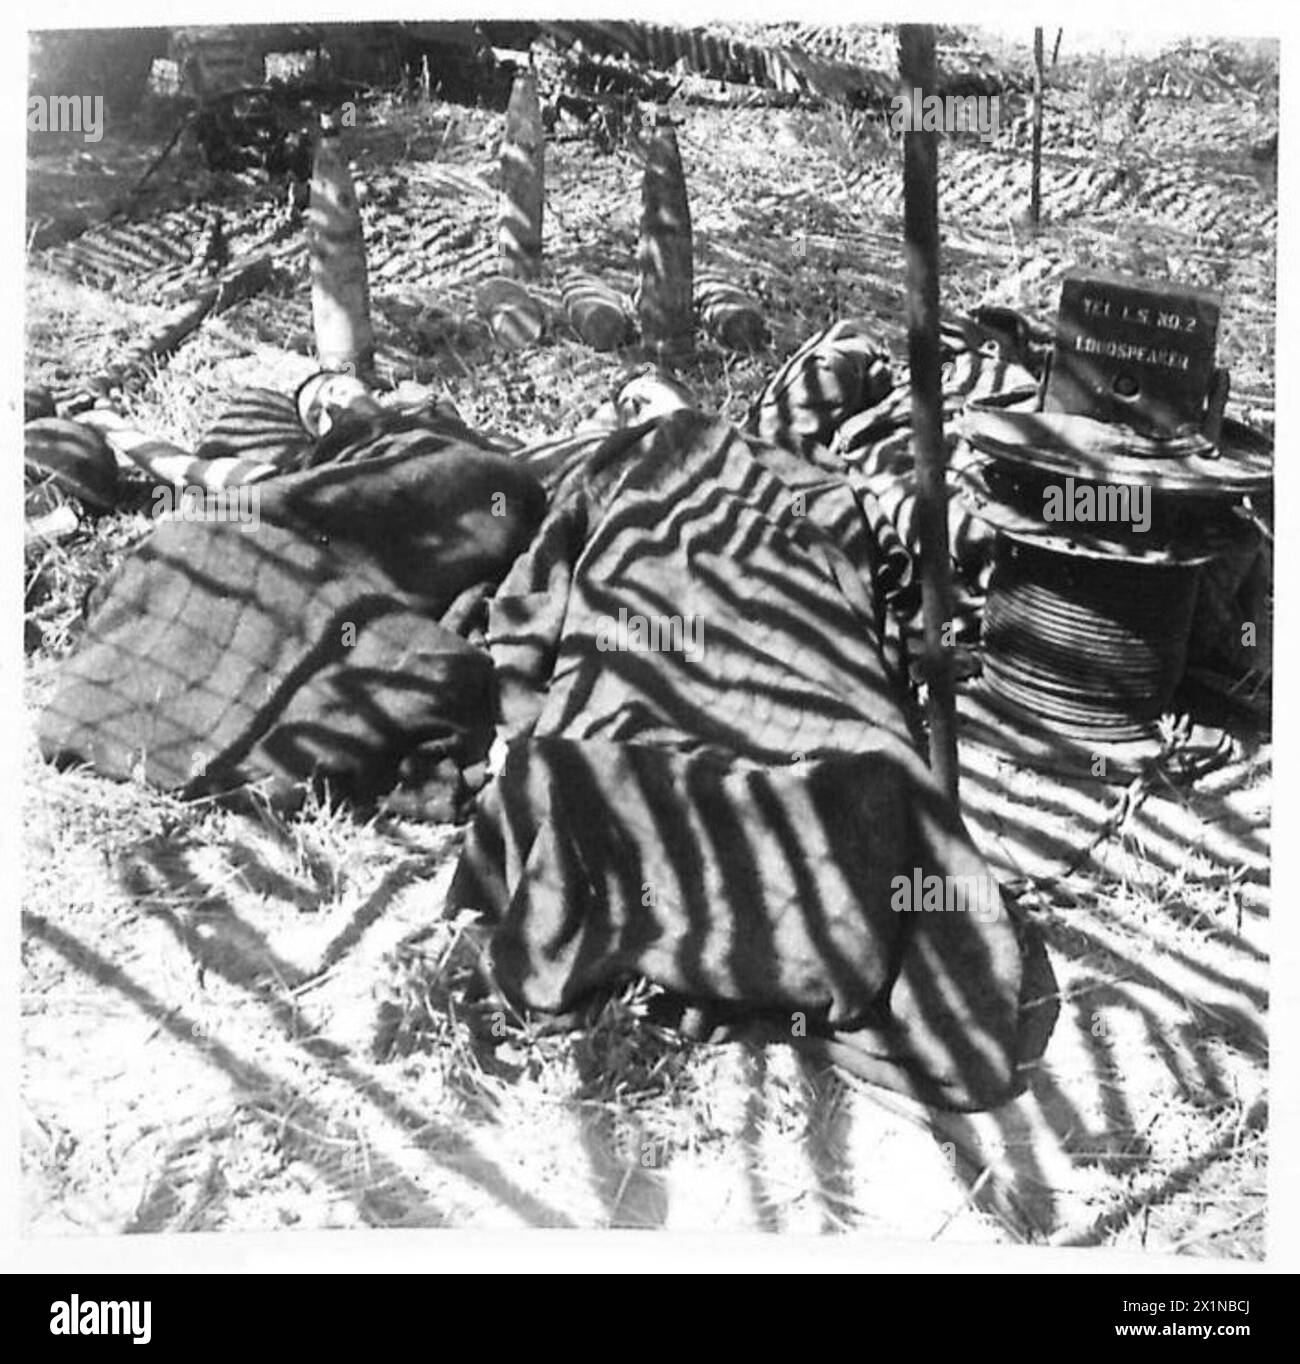 INVASION OF ITALY : 8TH ARMY A DAY IN THE LIFE OF THE GUNNERS - Known to the battery as 'Slim' and 'Lanky' the two gunners are seen in their beds besides the 5.5 Howitzer which they help to man, after having been on duty until the early hours of the morning. On the left Gunner 'Slim' Dixon, and on the right Gunner 'Lanky' Menley, British Army Stock Photo